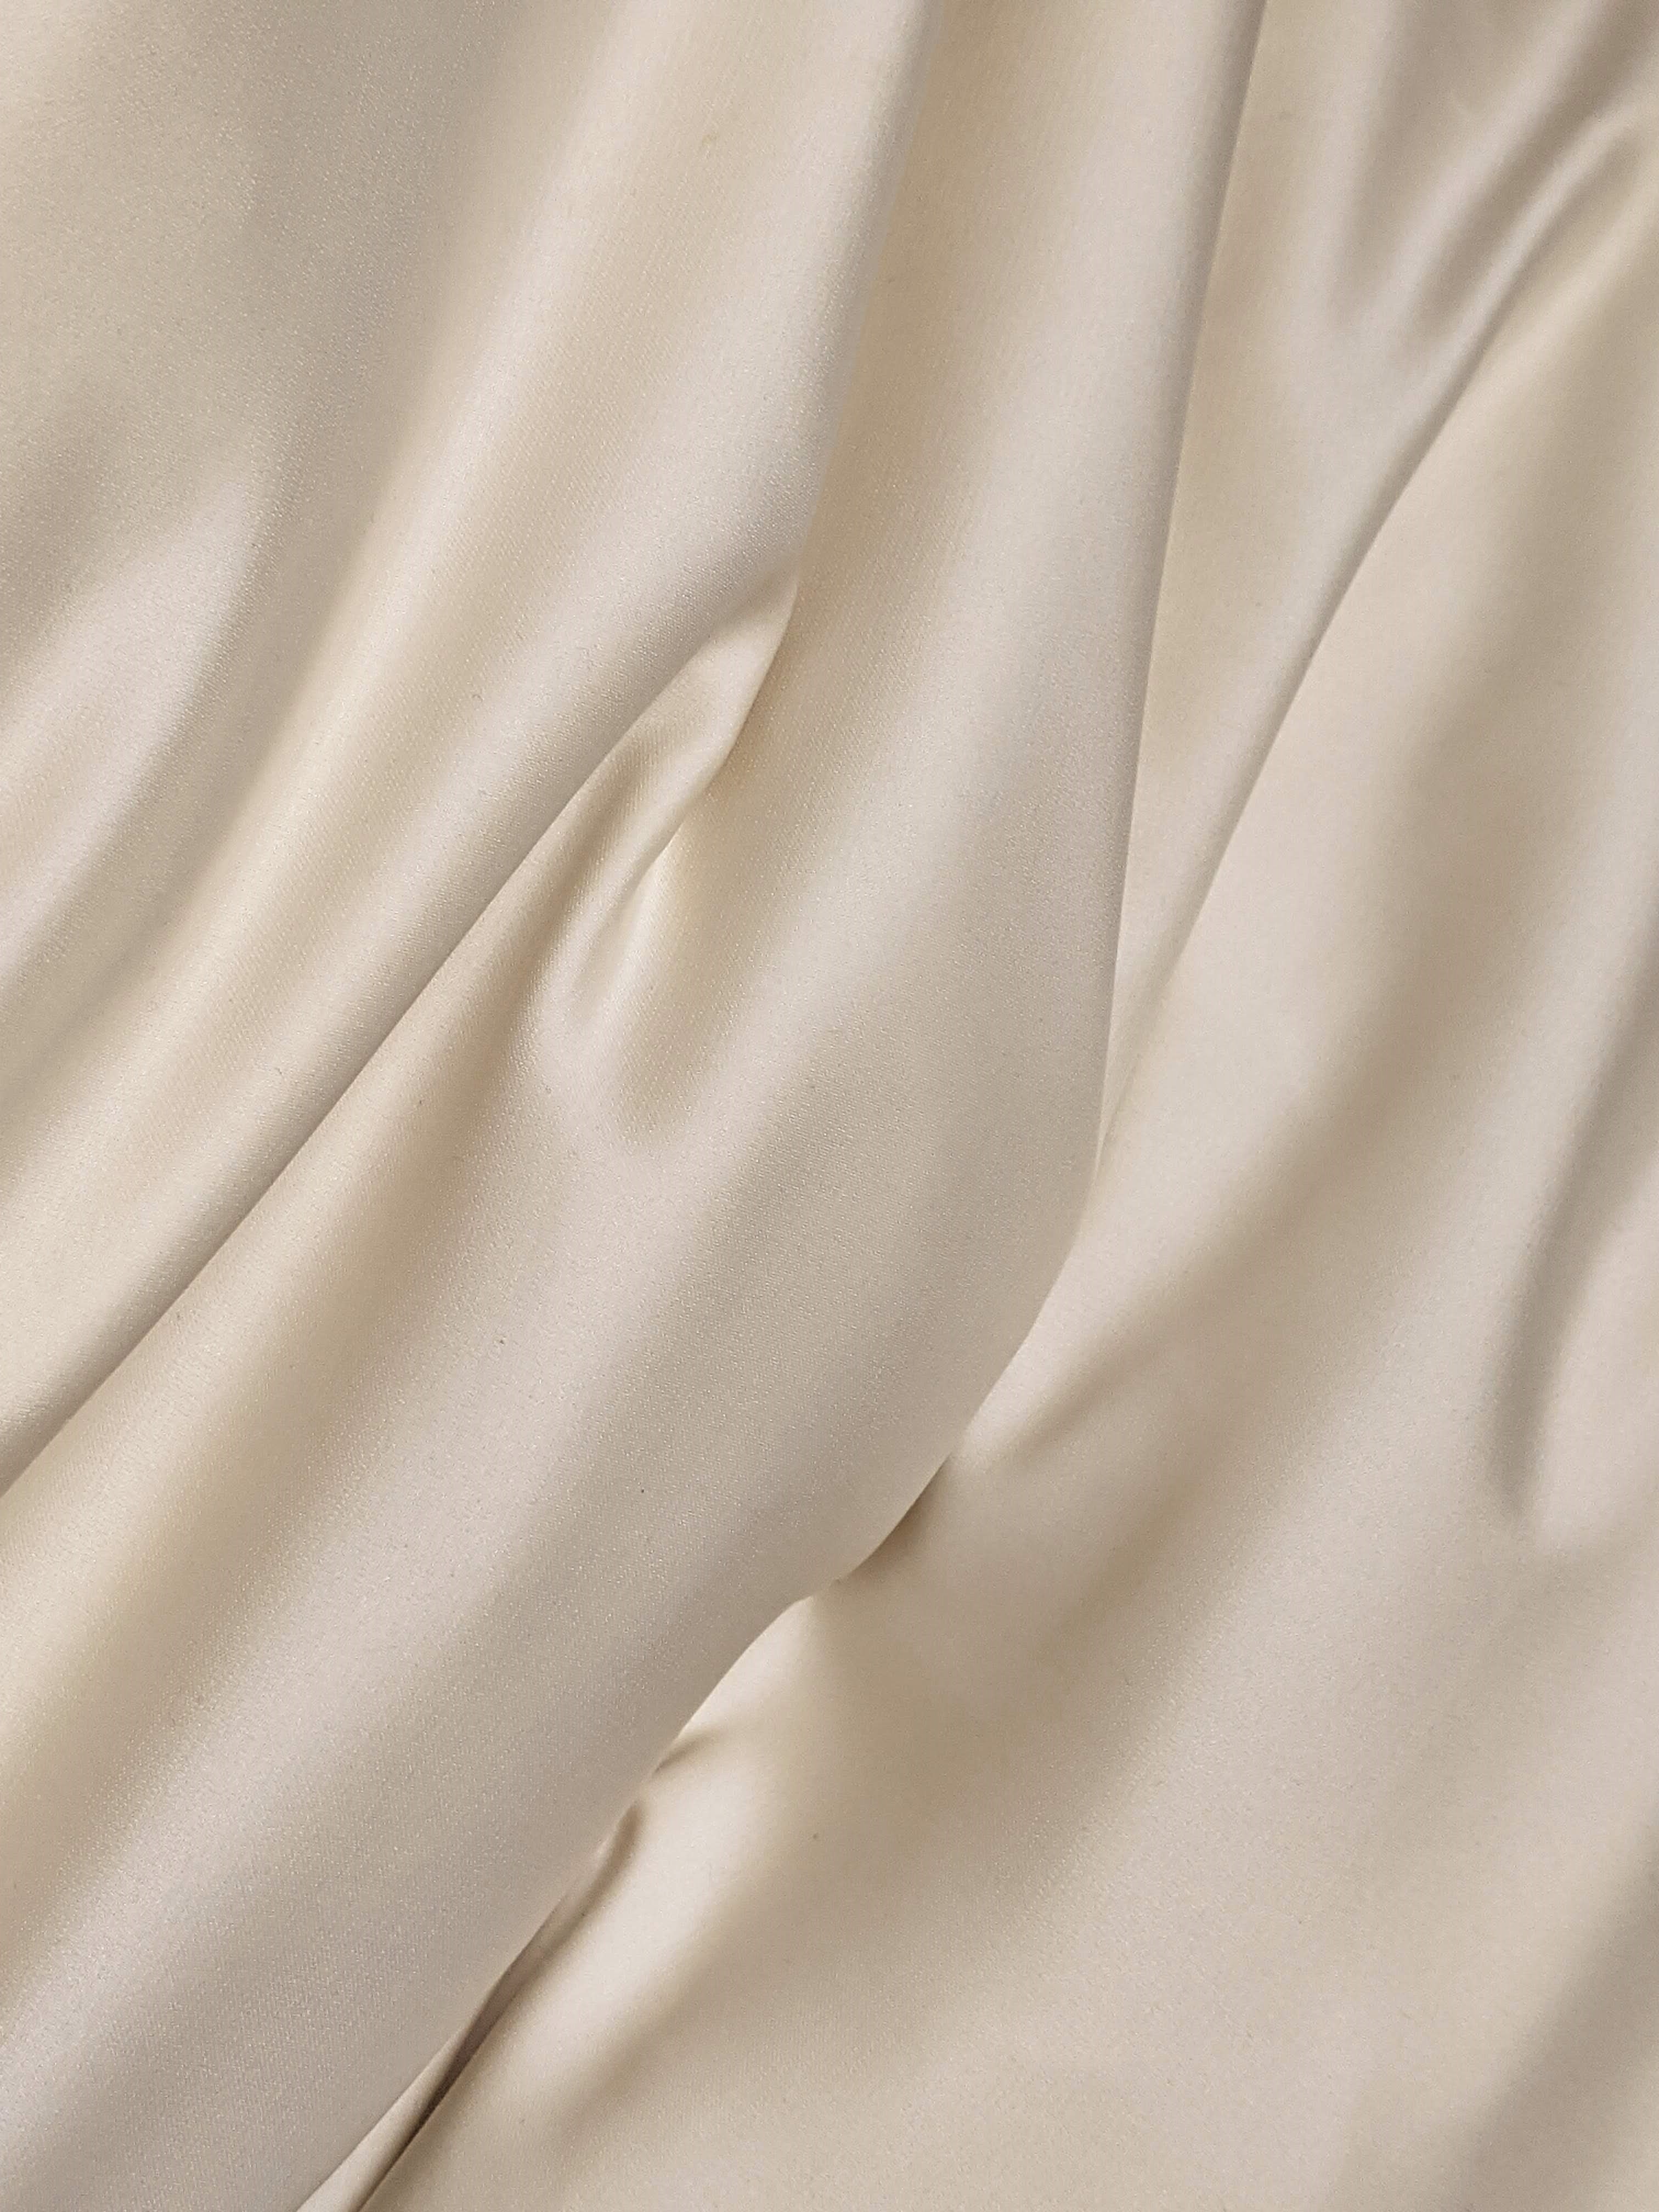 white, texture, textures, cloth, folds, pleating UHD